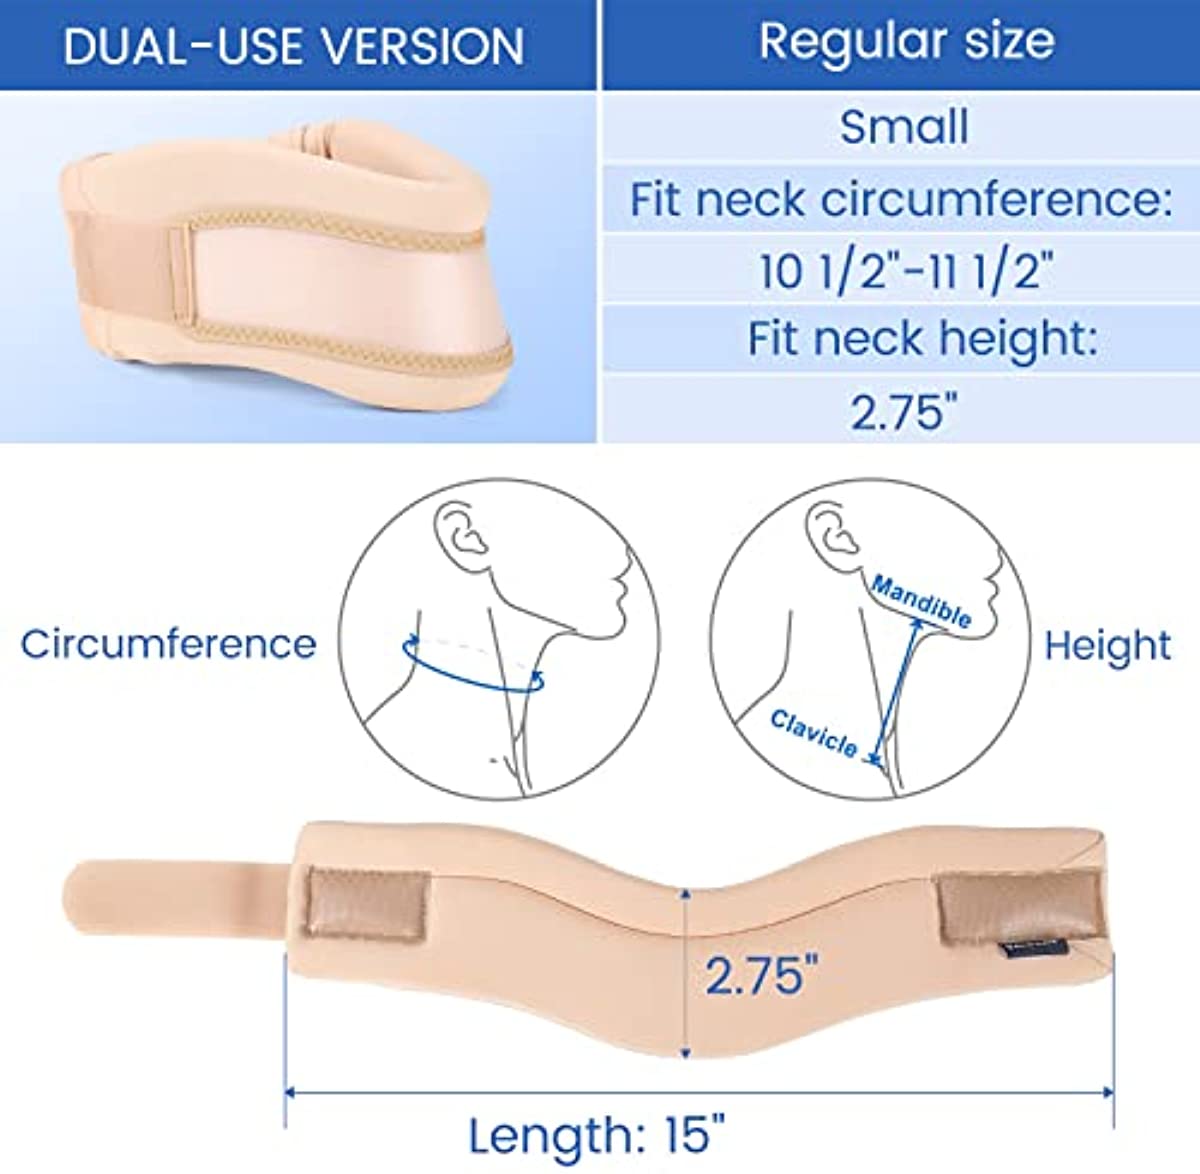 VELPEAU Neck Brace -Foam Cervical Collar - Soft Neck Support Relieves Pain & Pressure in Spine - Wraps Aligns Stabilizes Vertebrae - Can Be Used During Sleep (Dual-use, Brown, Small, 2.75″)